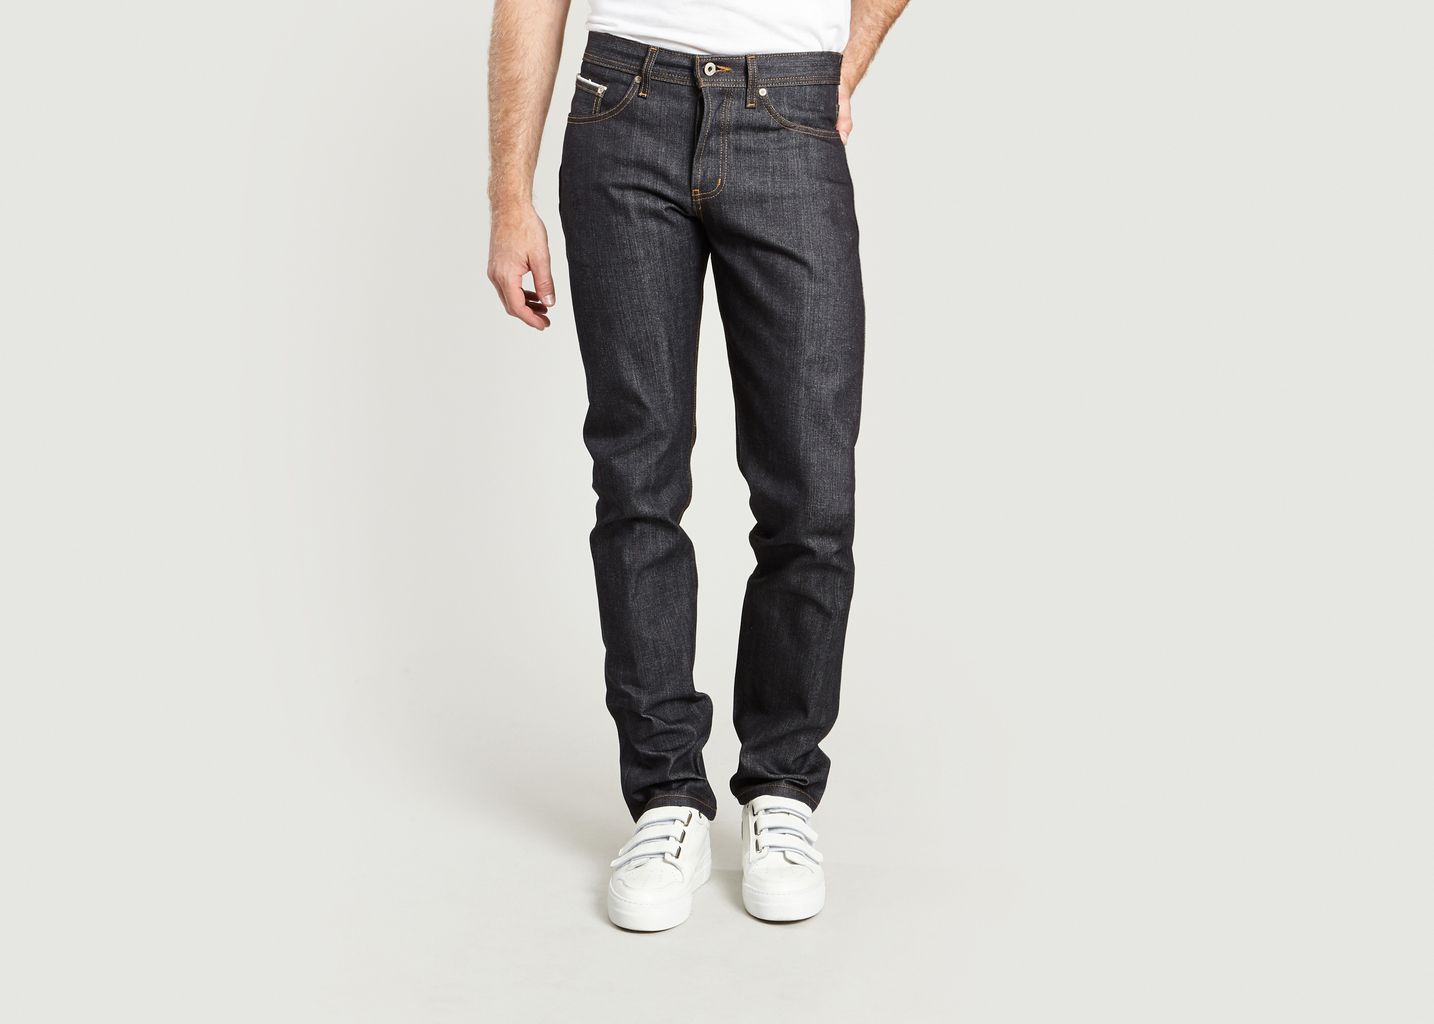 Jean Weird Guy Selvedge Left Hand Twill - Naked and Famous